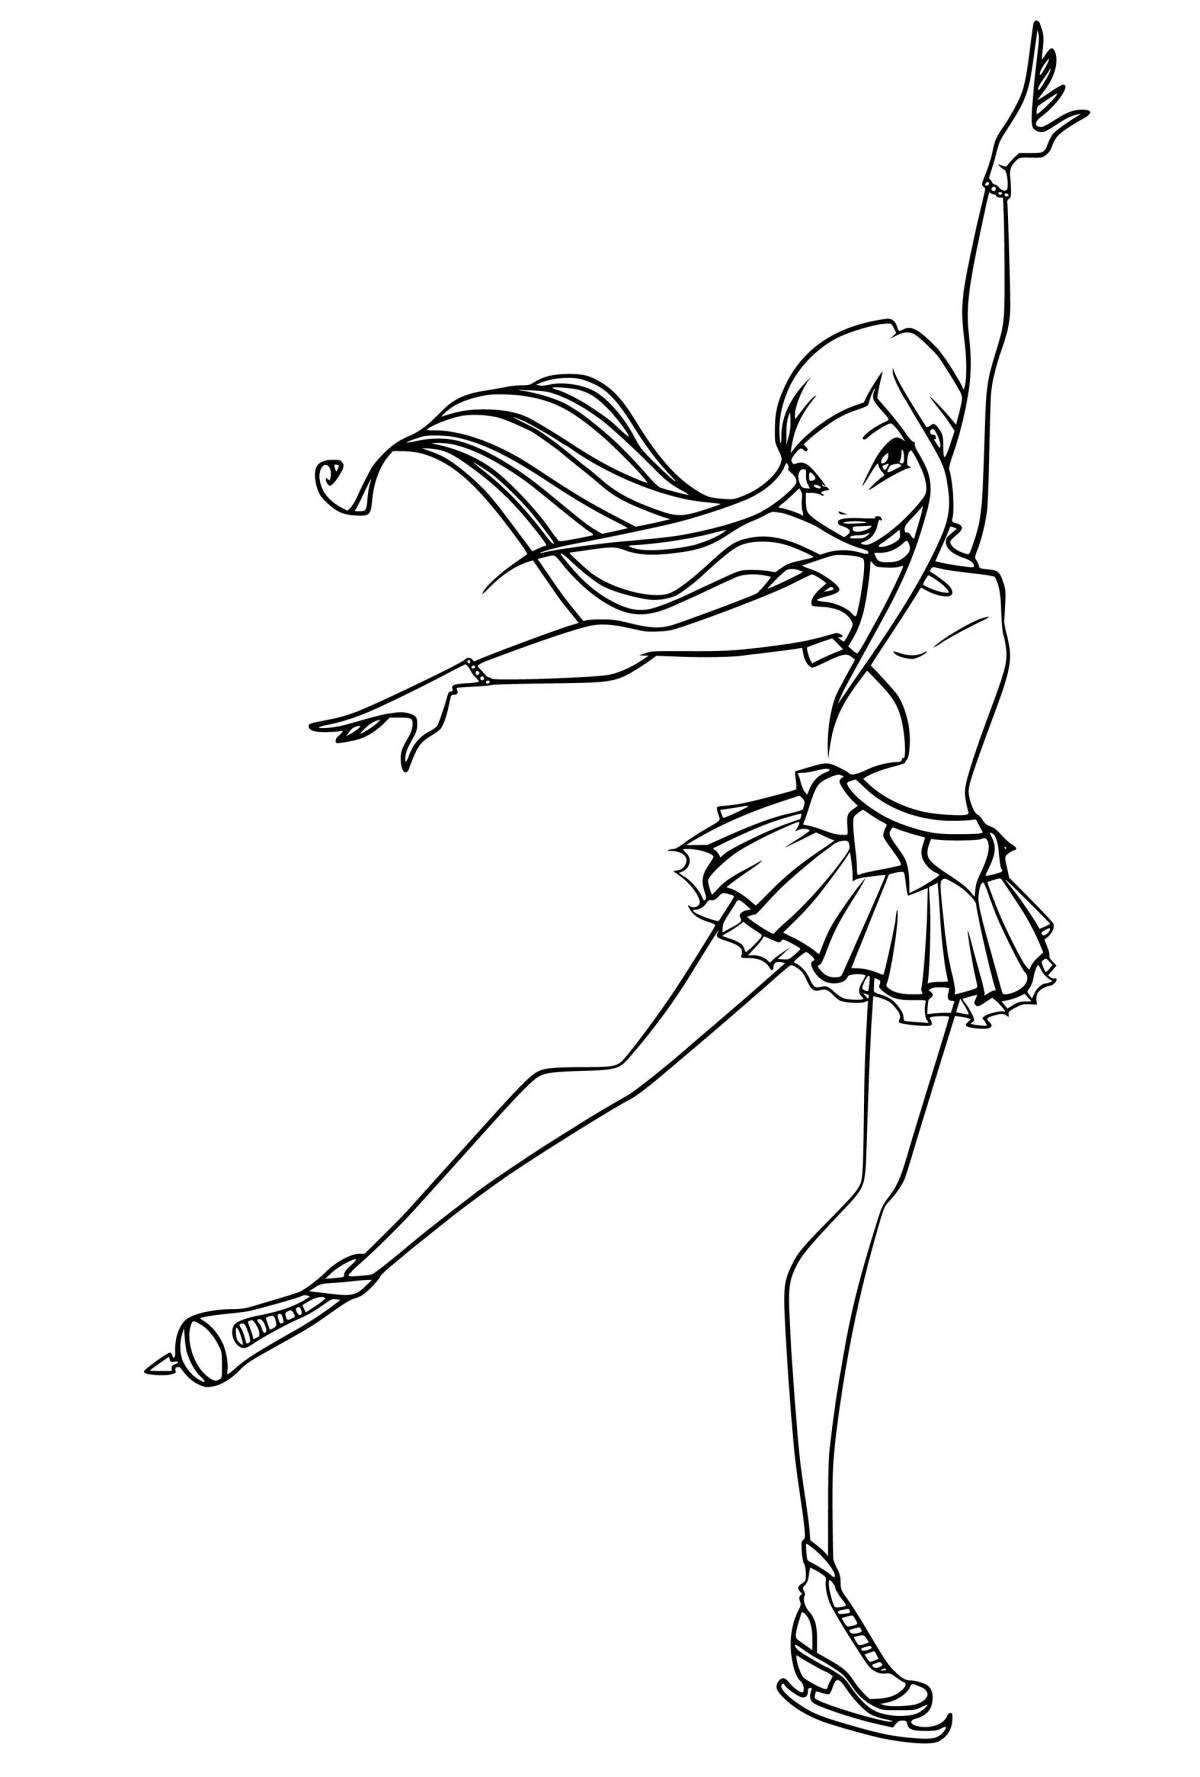 Charming winx roxy coloring book